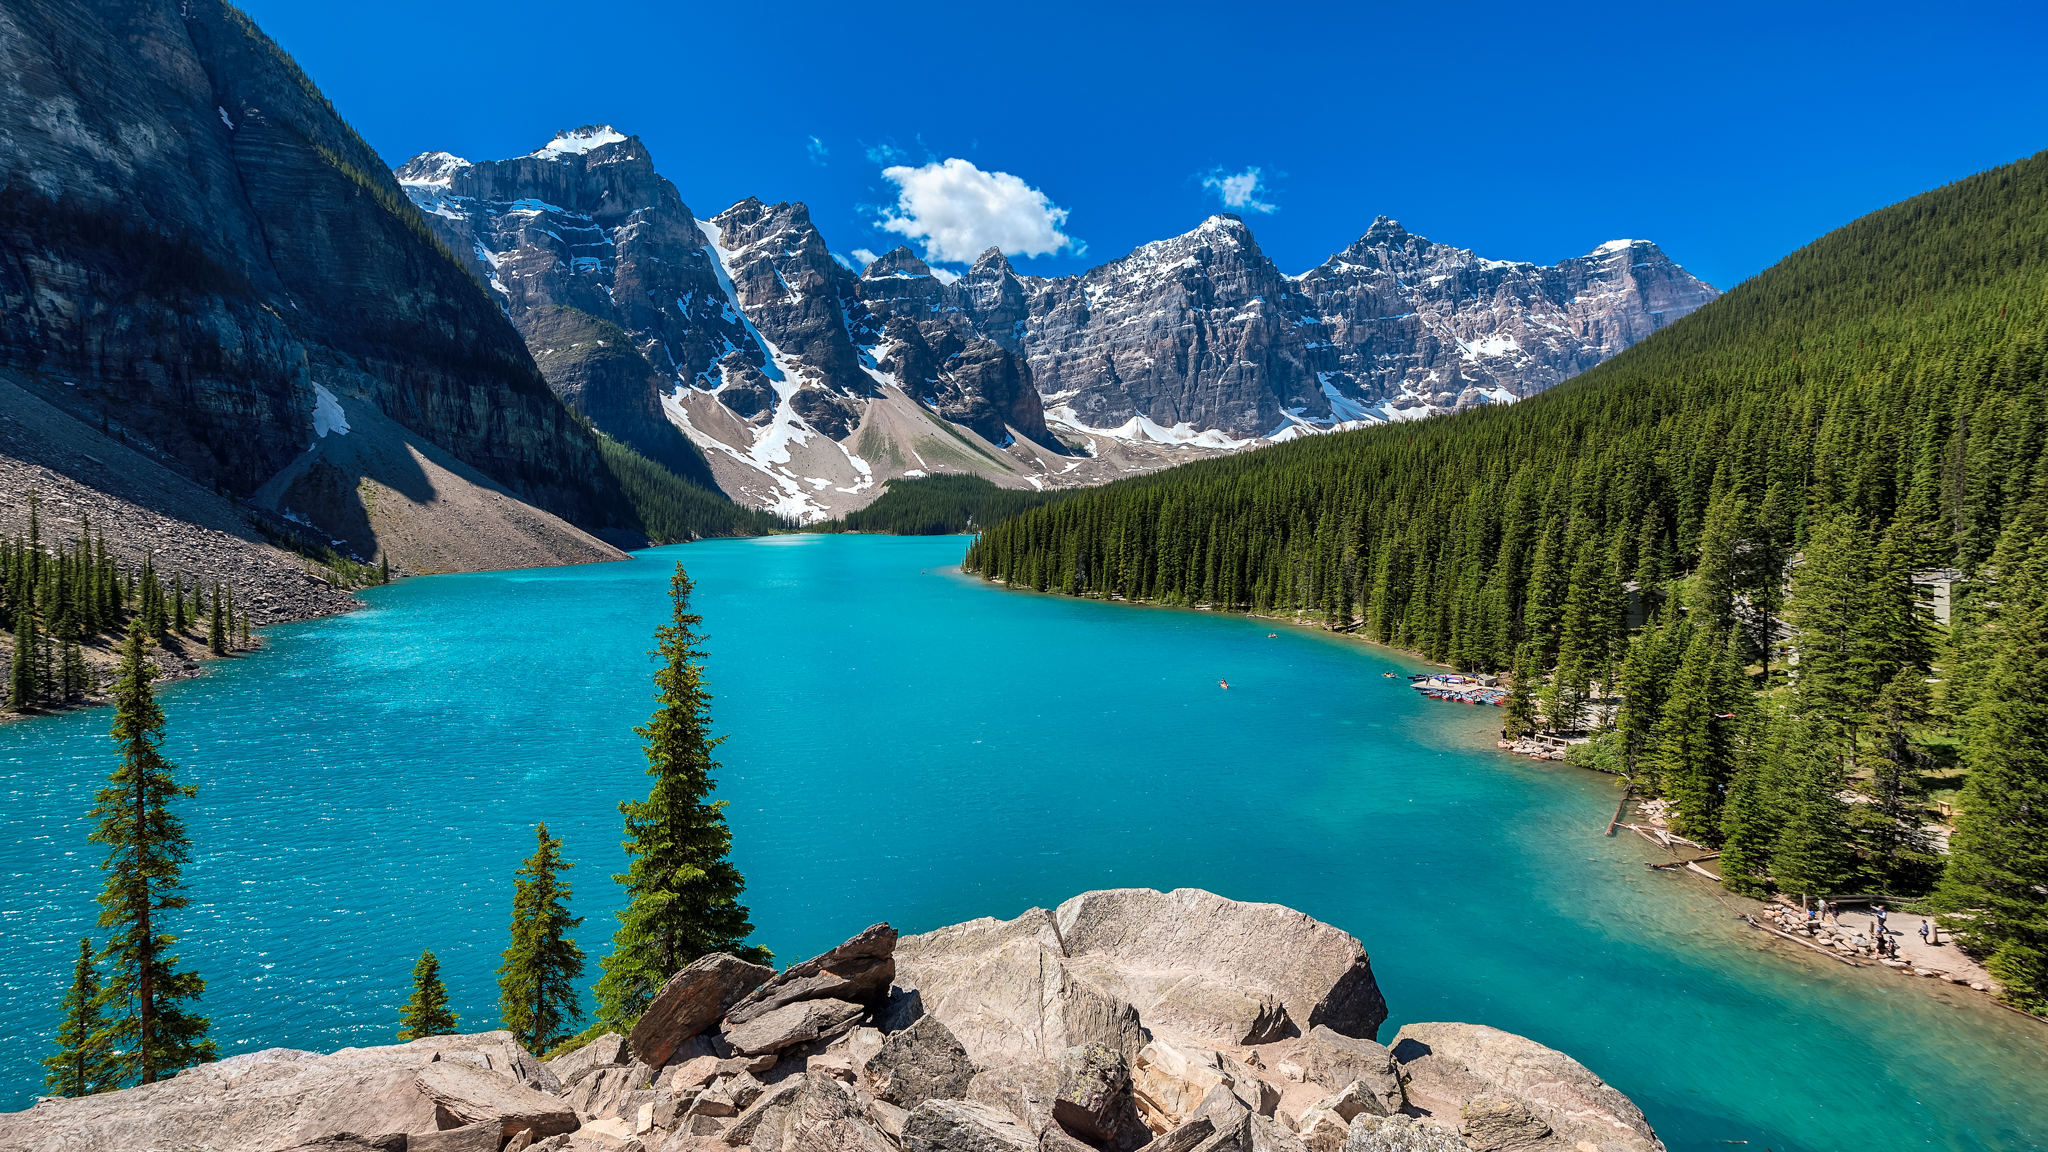 The stunning turquoise blue water at Moraine Lake.